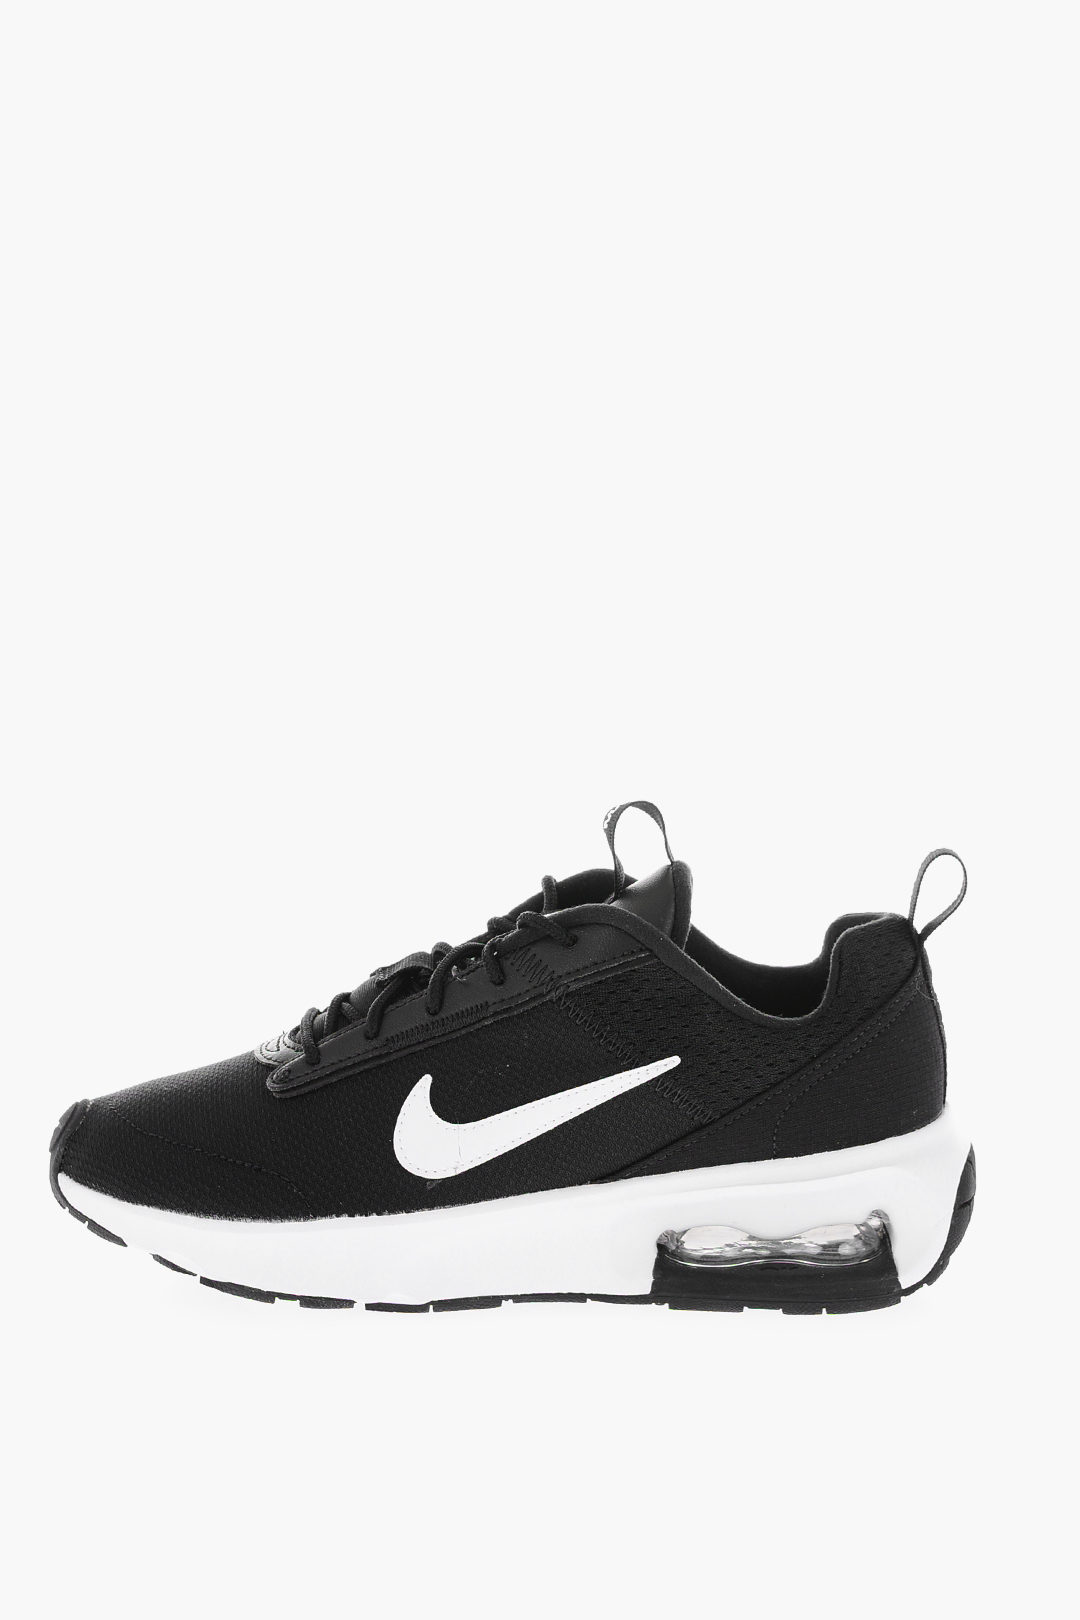 Ocurrencia Peregrinación Napier Nike Air Bubble Sole NIKE AIR MAX INTRLK LITE Low-Top Sneakers women -  Glamood Outlet